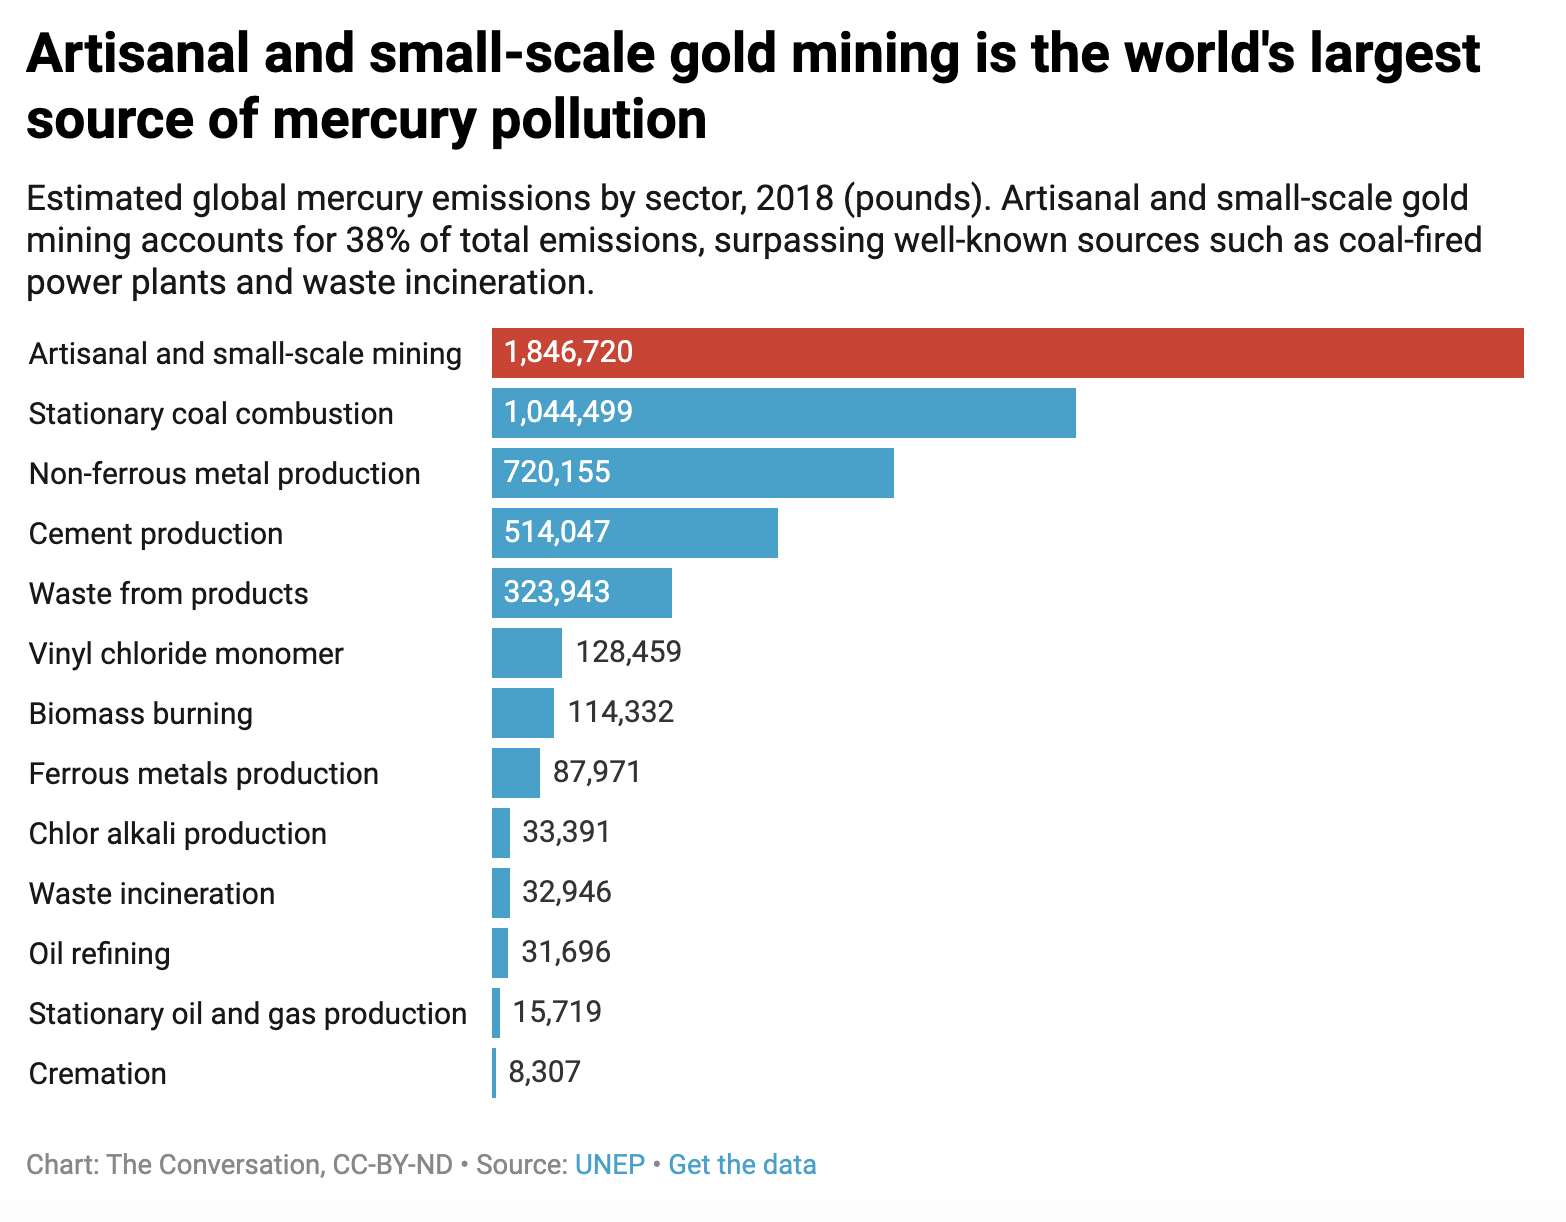 Gold mining source of mercury pollution. Source: The Conversation